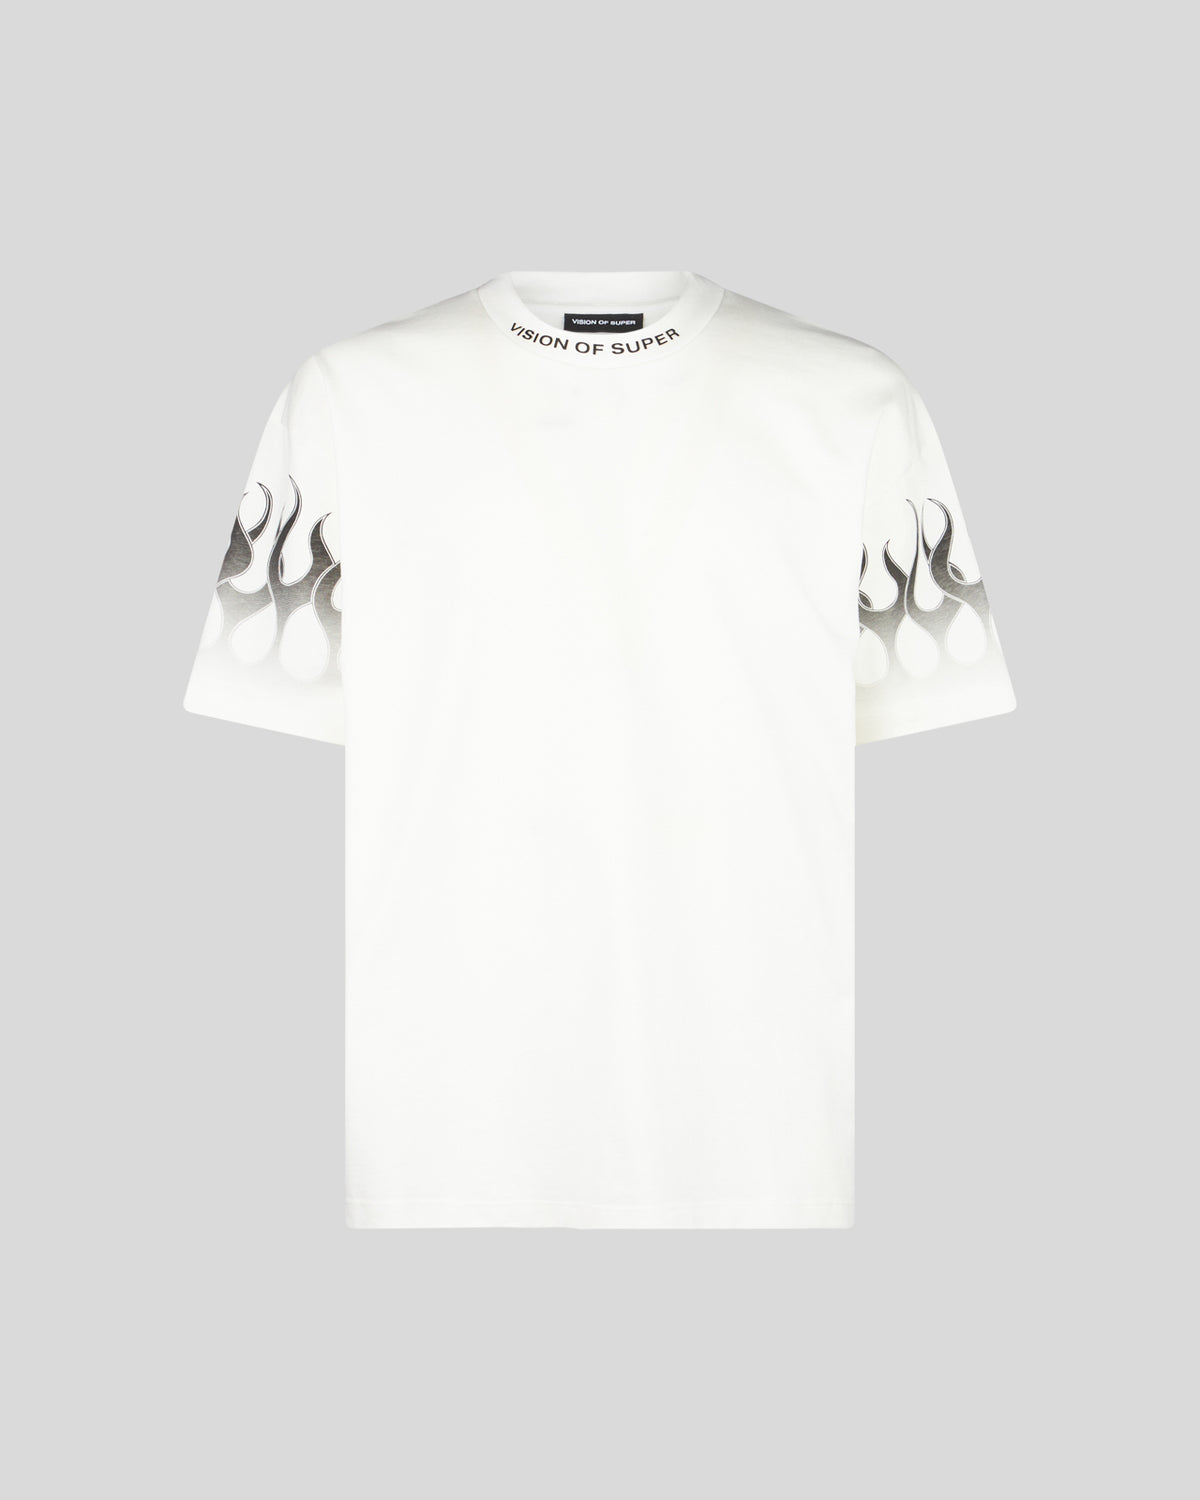 VISION OF SUPER WHITE TSHIRT WITH BLACK RACING FLAMES